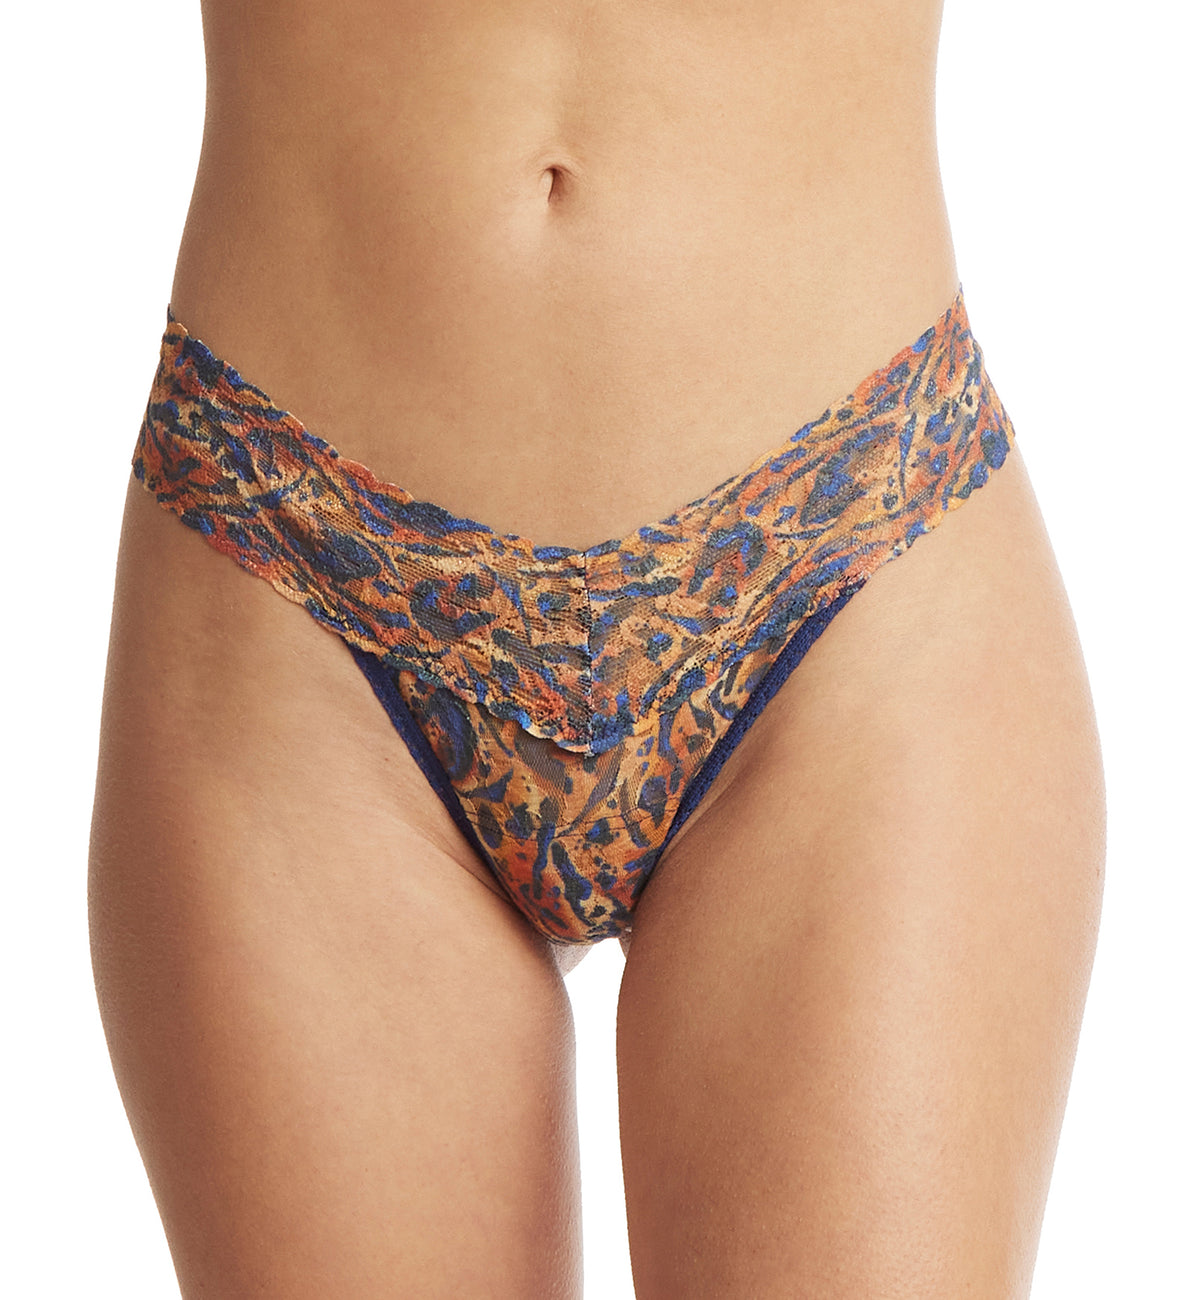 Hanky Panky Signature Lace Printed Low Rise Thong (PR4911P),Wild About Blue - Wild About Blue,One Size